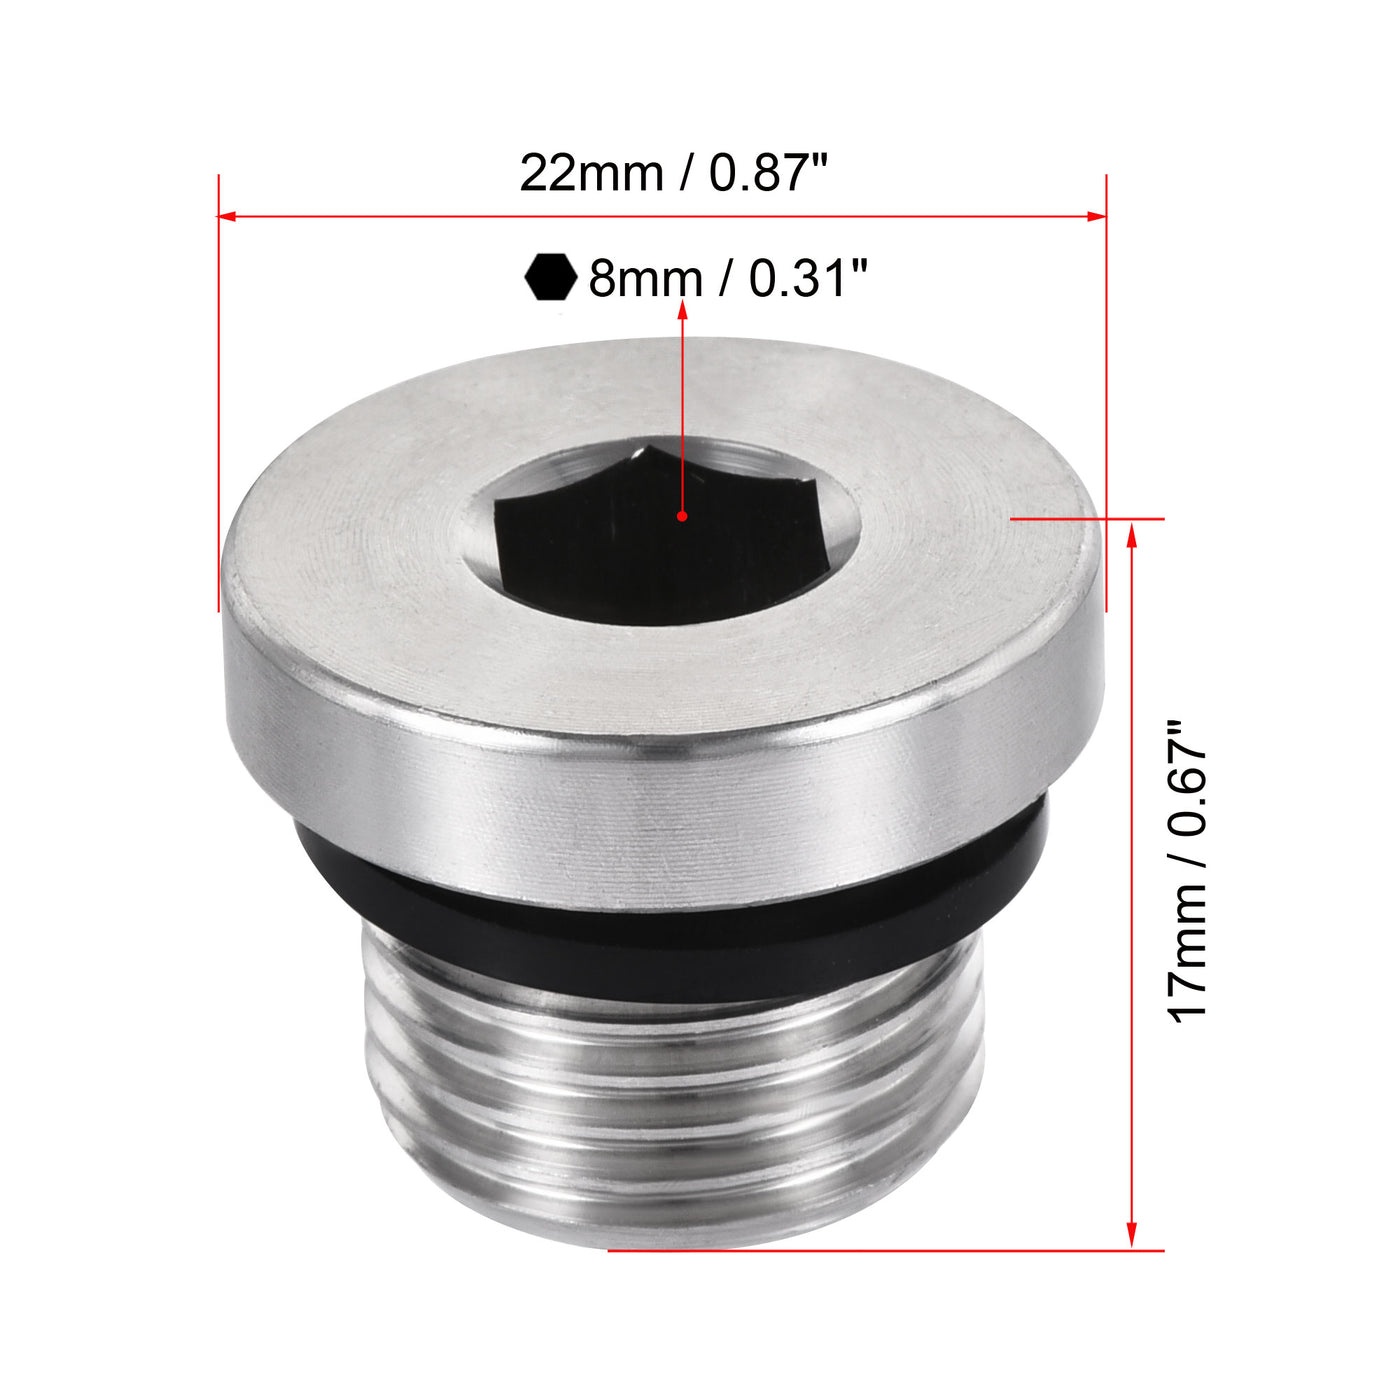 uxcell Uxcell Stainless Steel Inner Hex Head Pipe Plug with Seal Ring 2Pcs